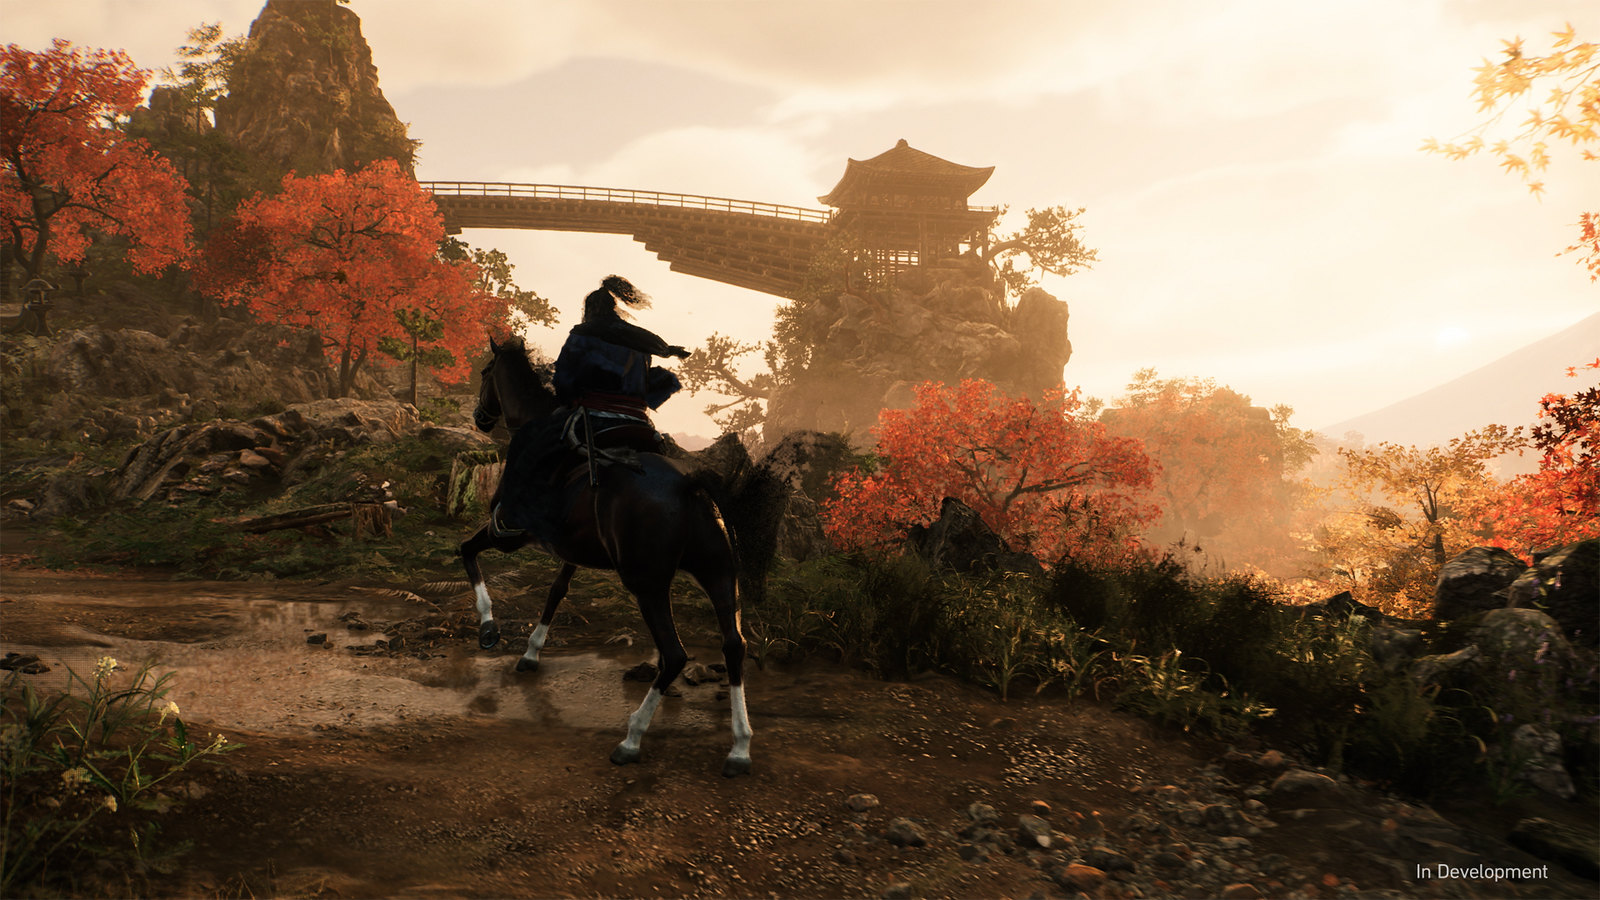 Horse riding in Rise of the Ronin.